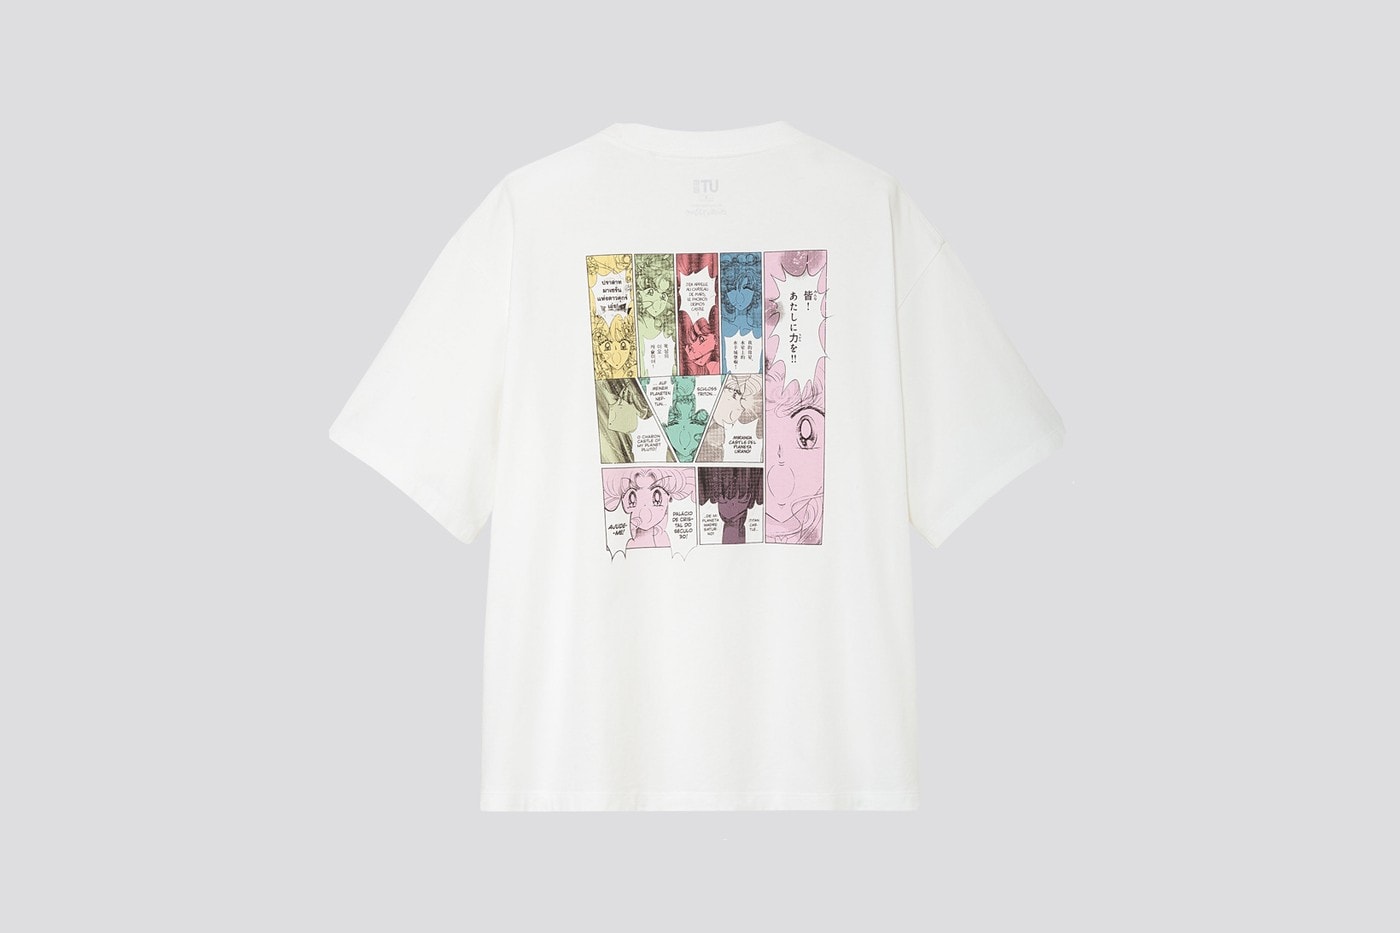 sailor moon uniqlo UT collection t shirt release date